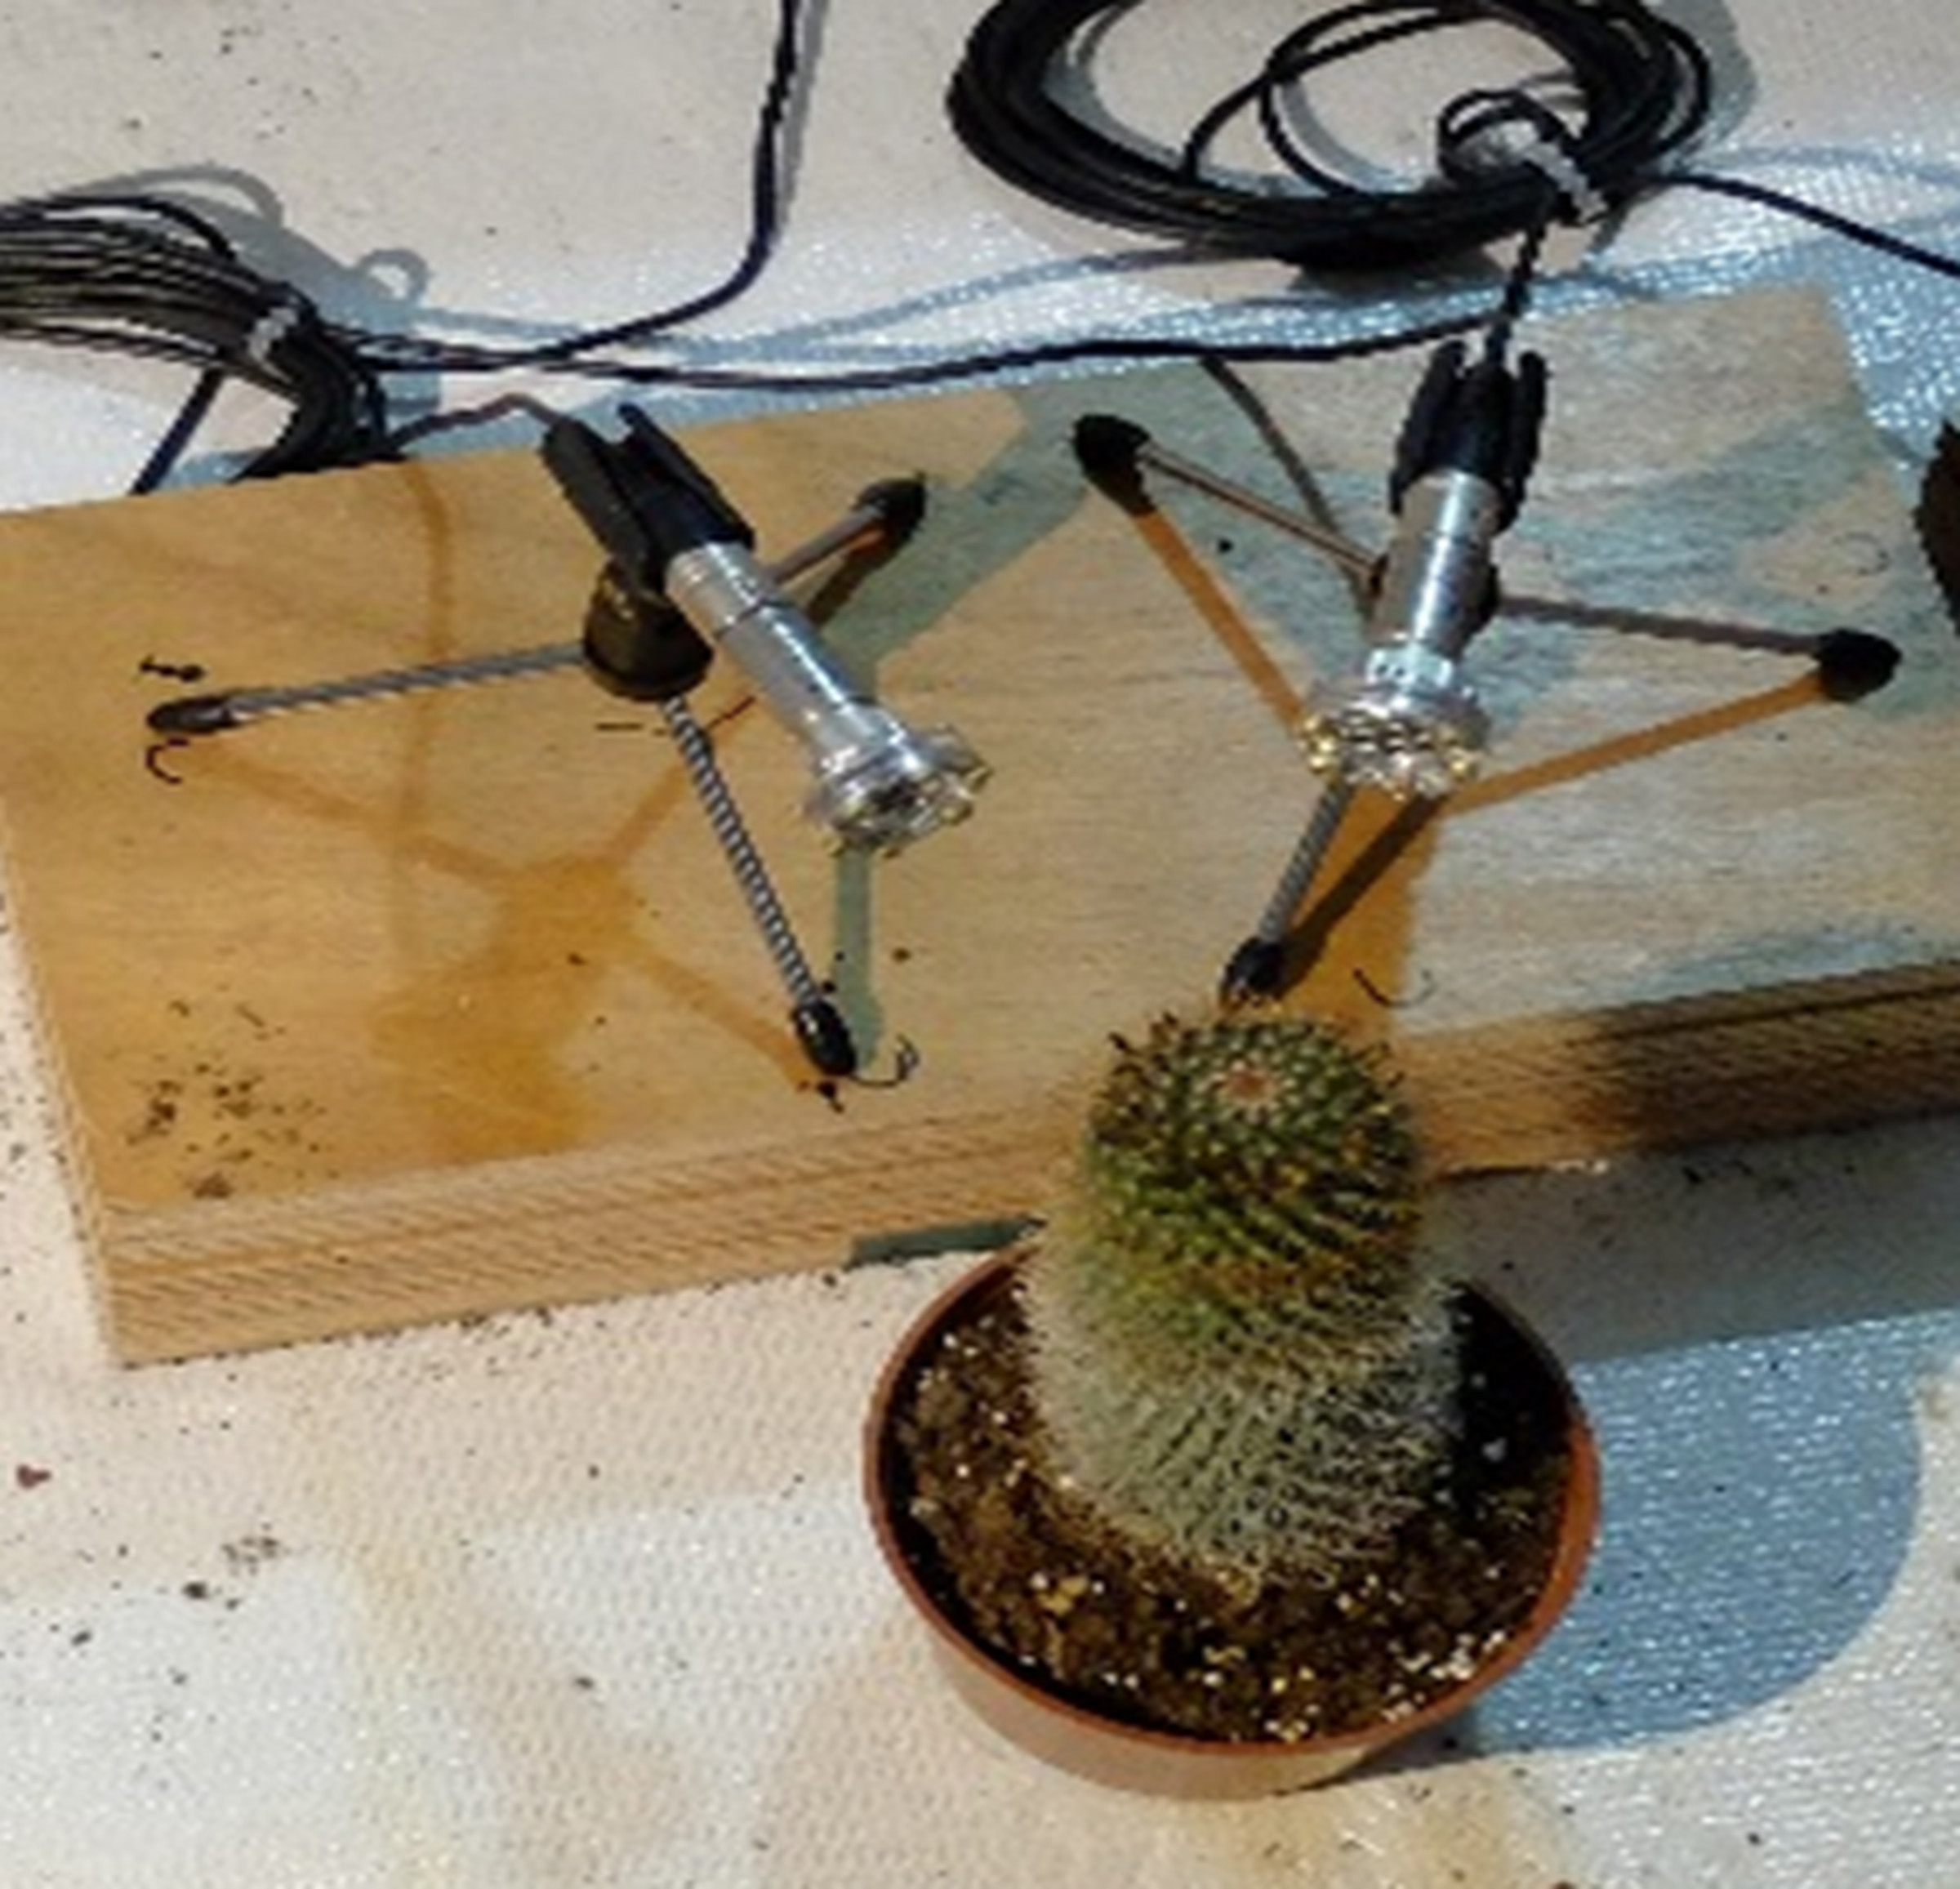 A potted cactus with two microphones propped up and pointing towards it.